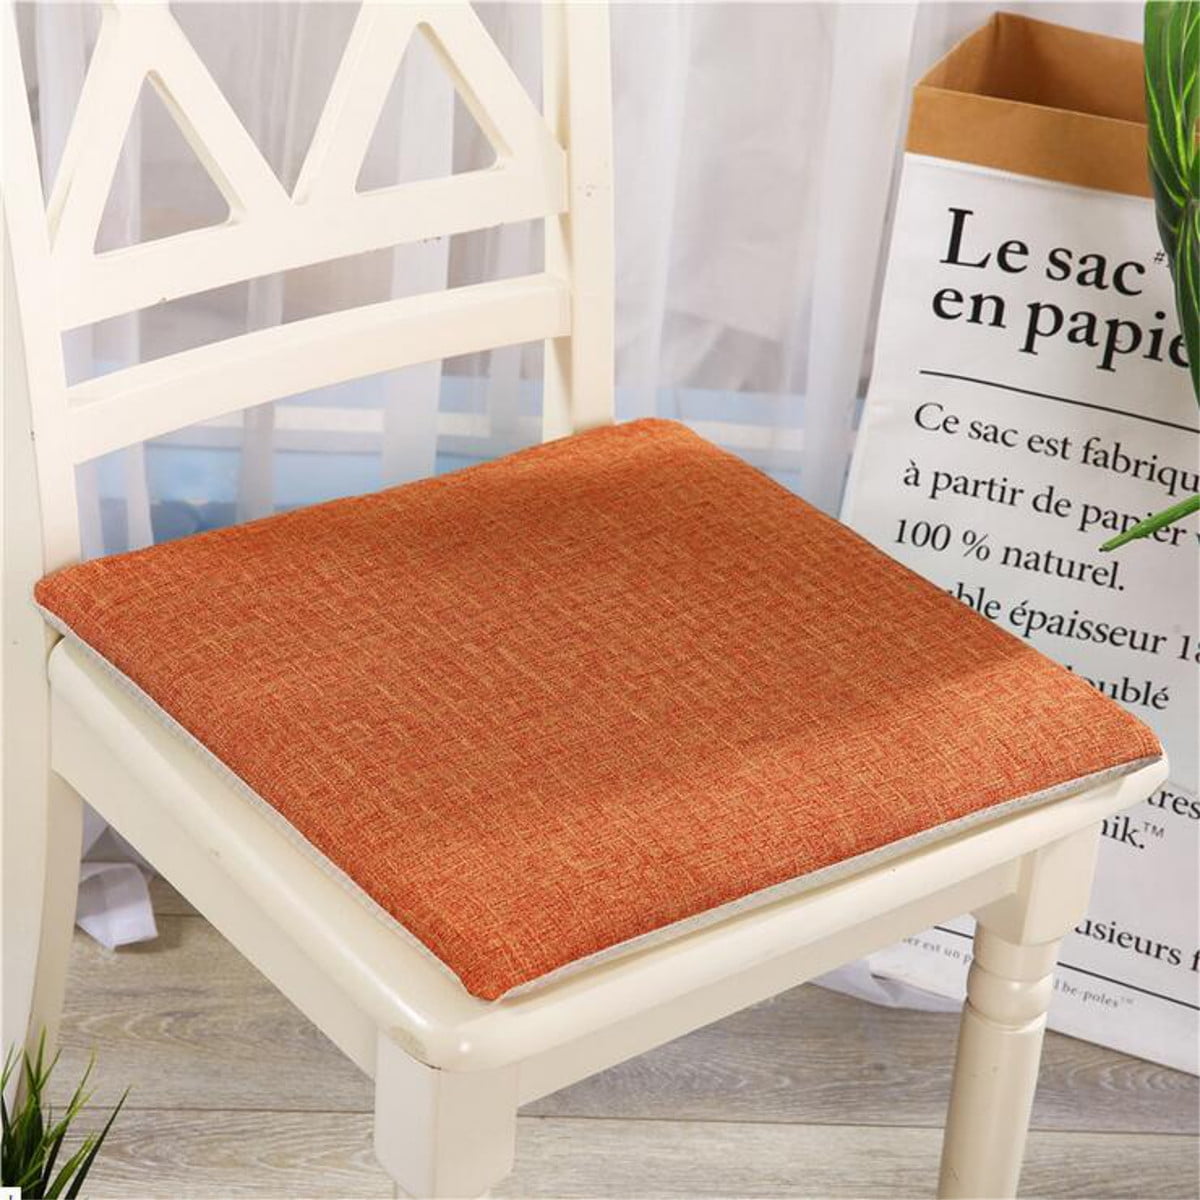 Anti-Slip Pad Cushion Office Chair Indoor outdoor Dining Seat Pad Tie On Square 